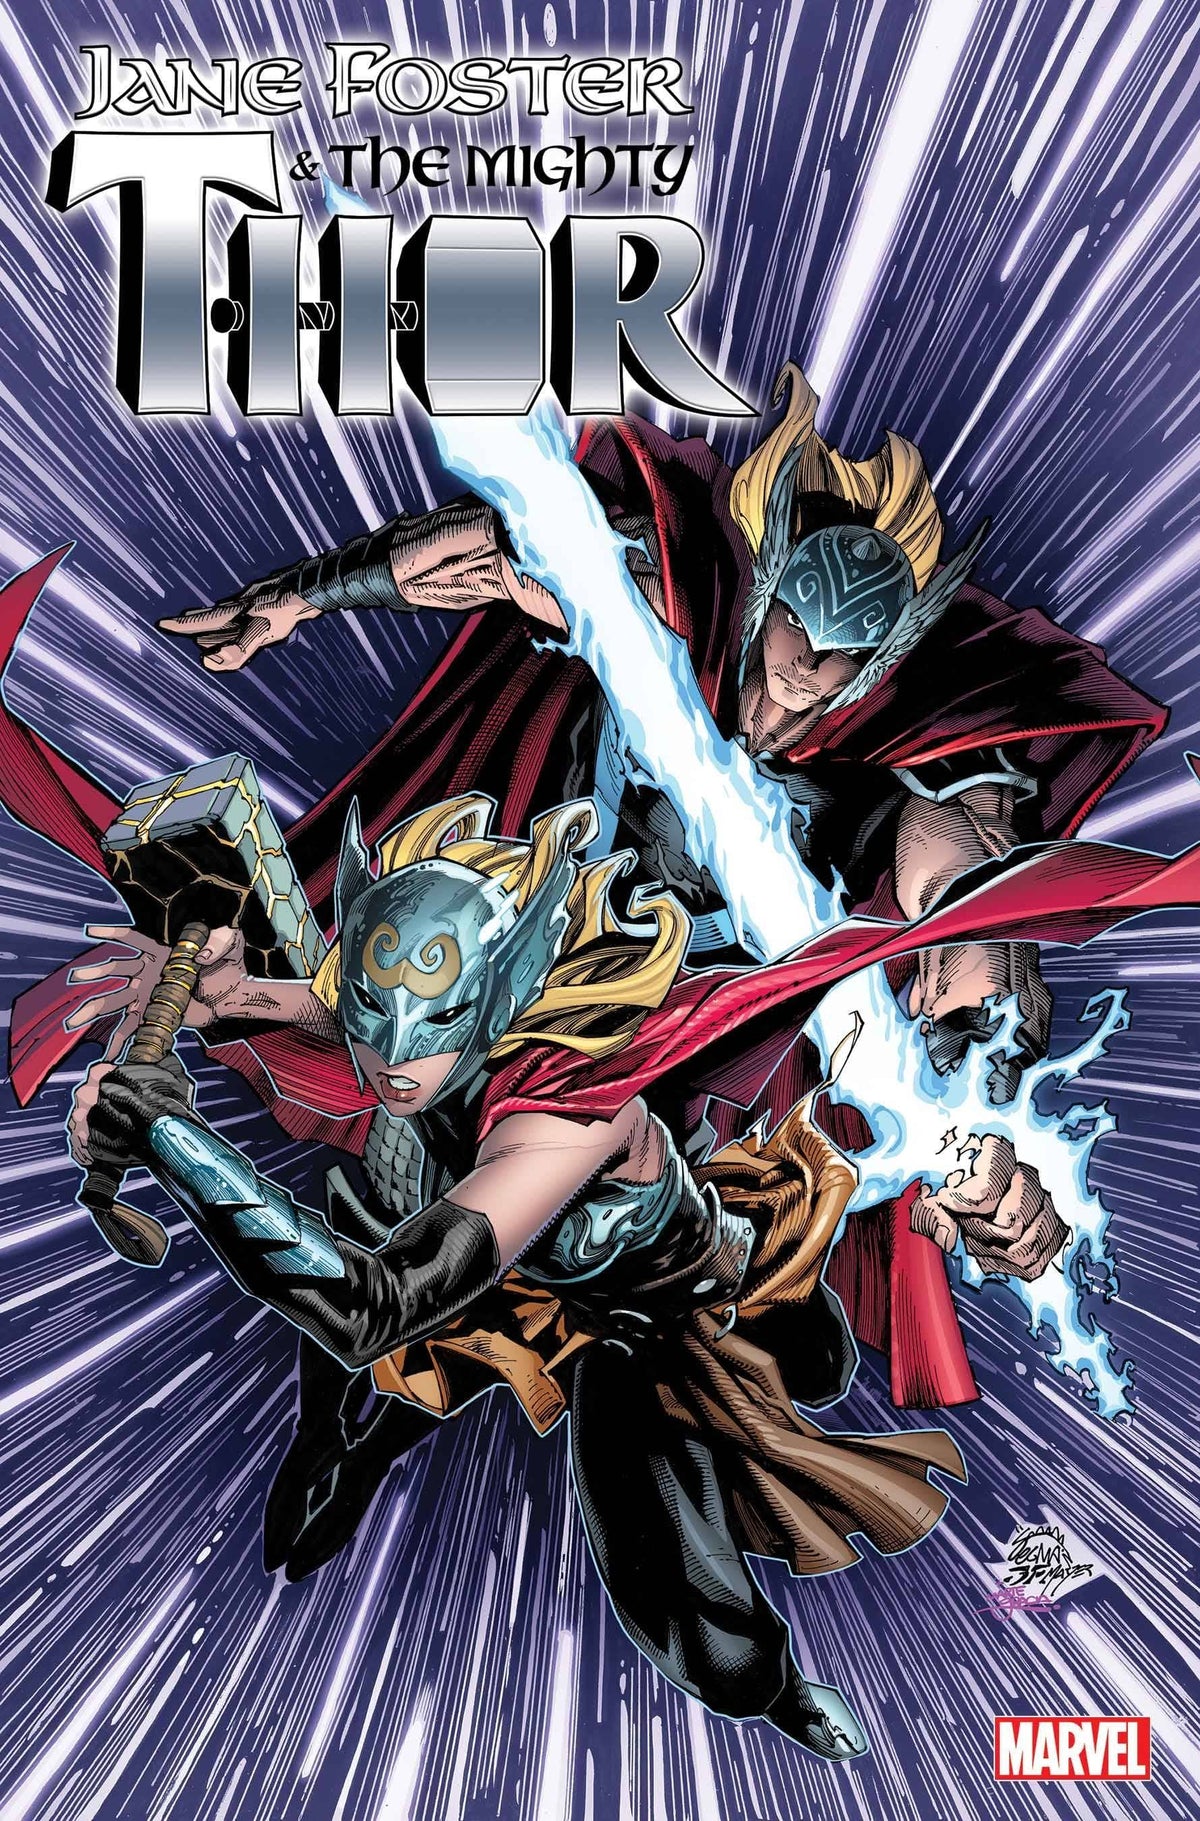 JANE FOSTER MIGHTY THOR #1 (OF 5) - Third Eye